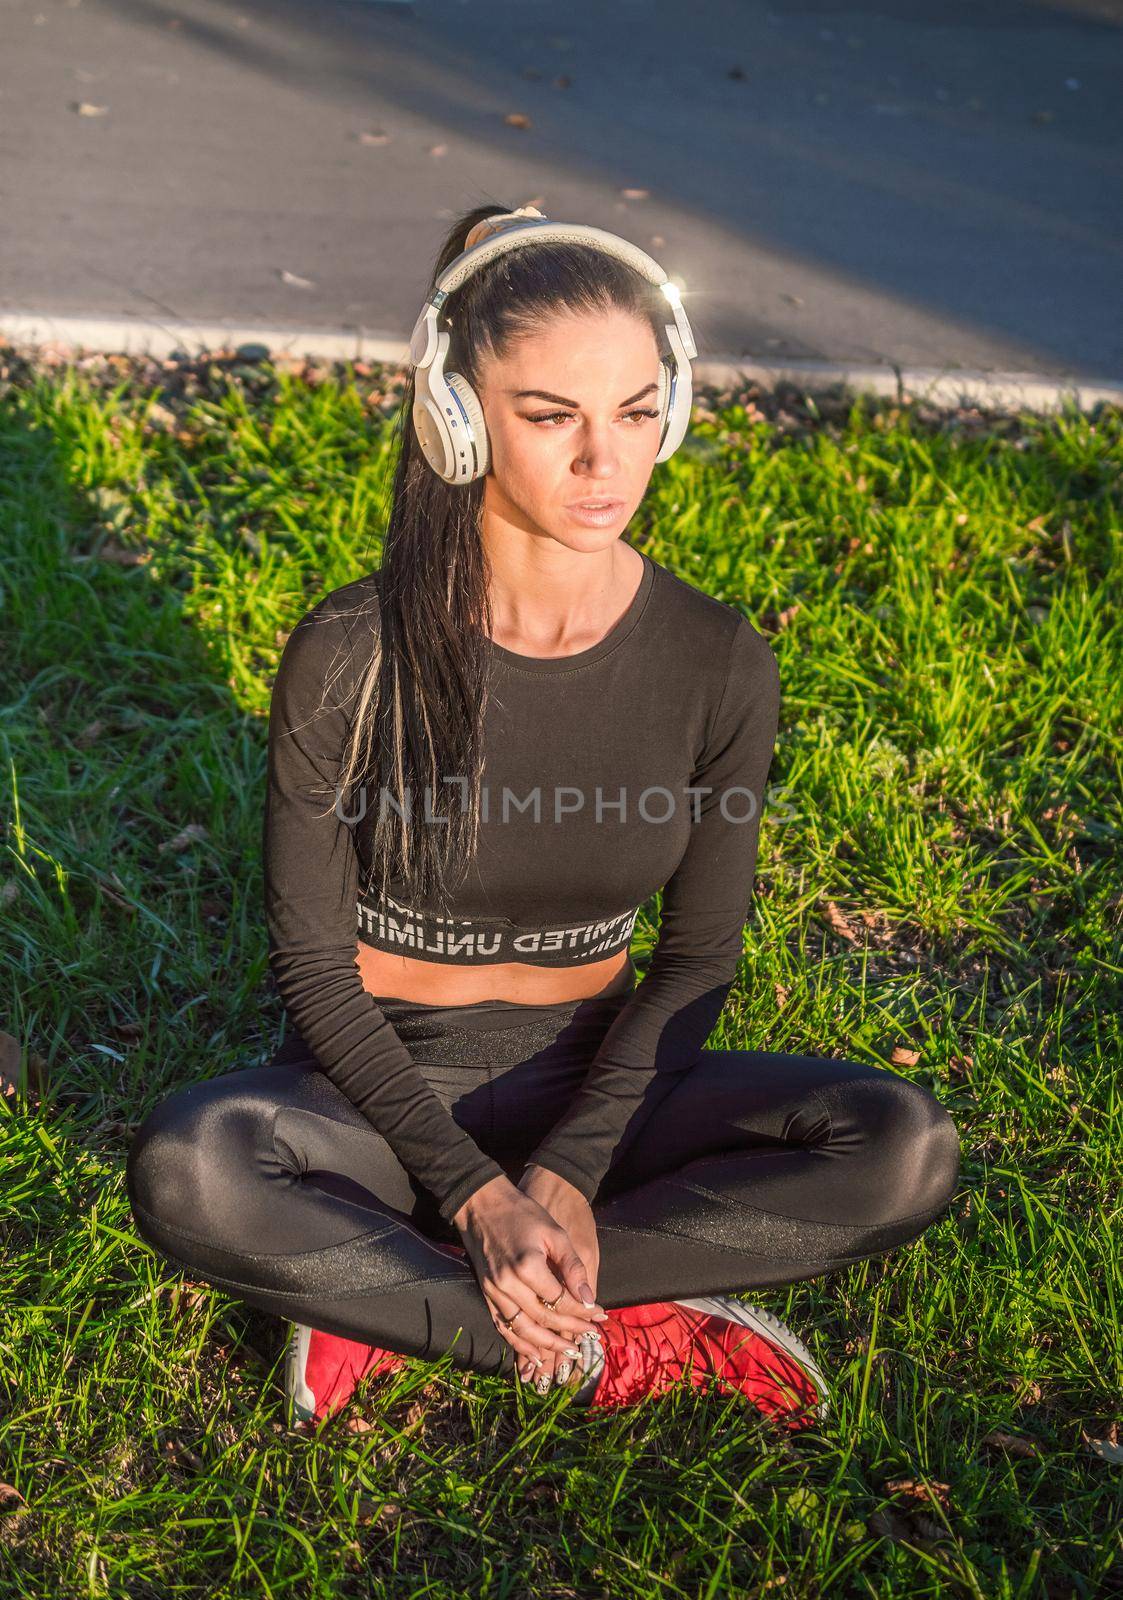 Pretty young girl in headphones listening to music by Proff